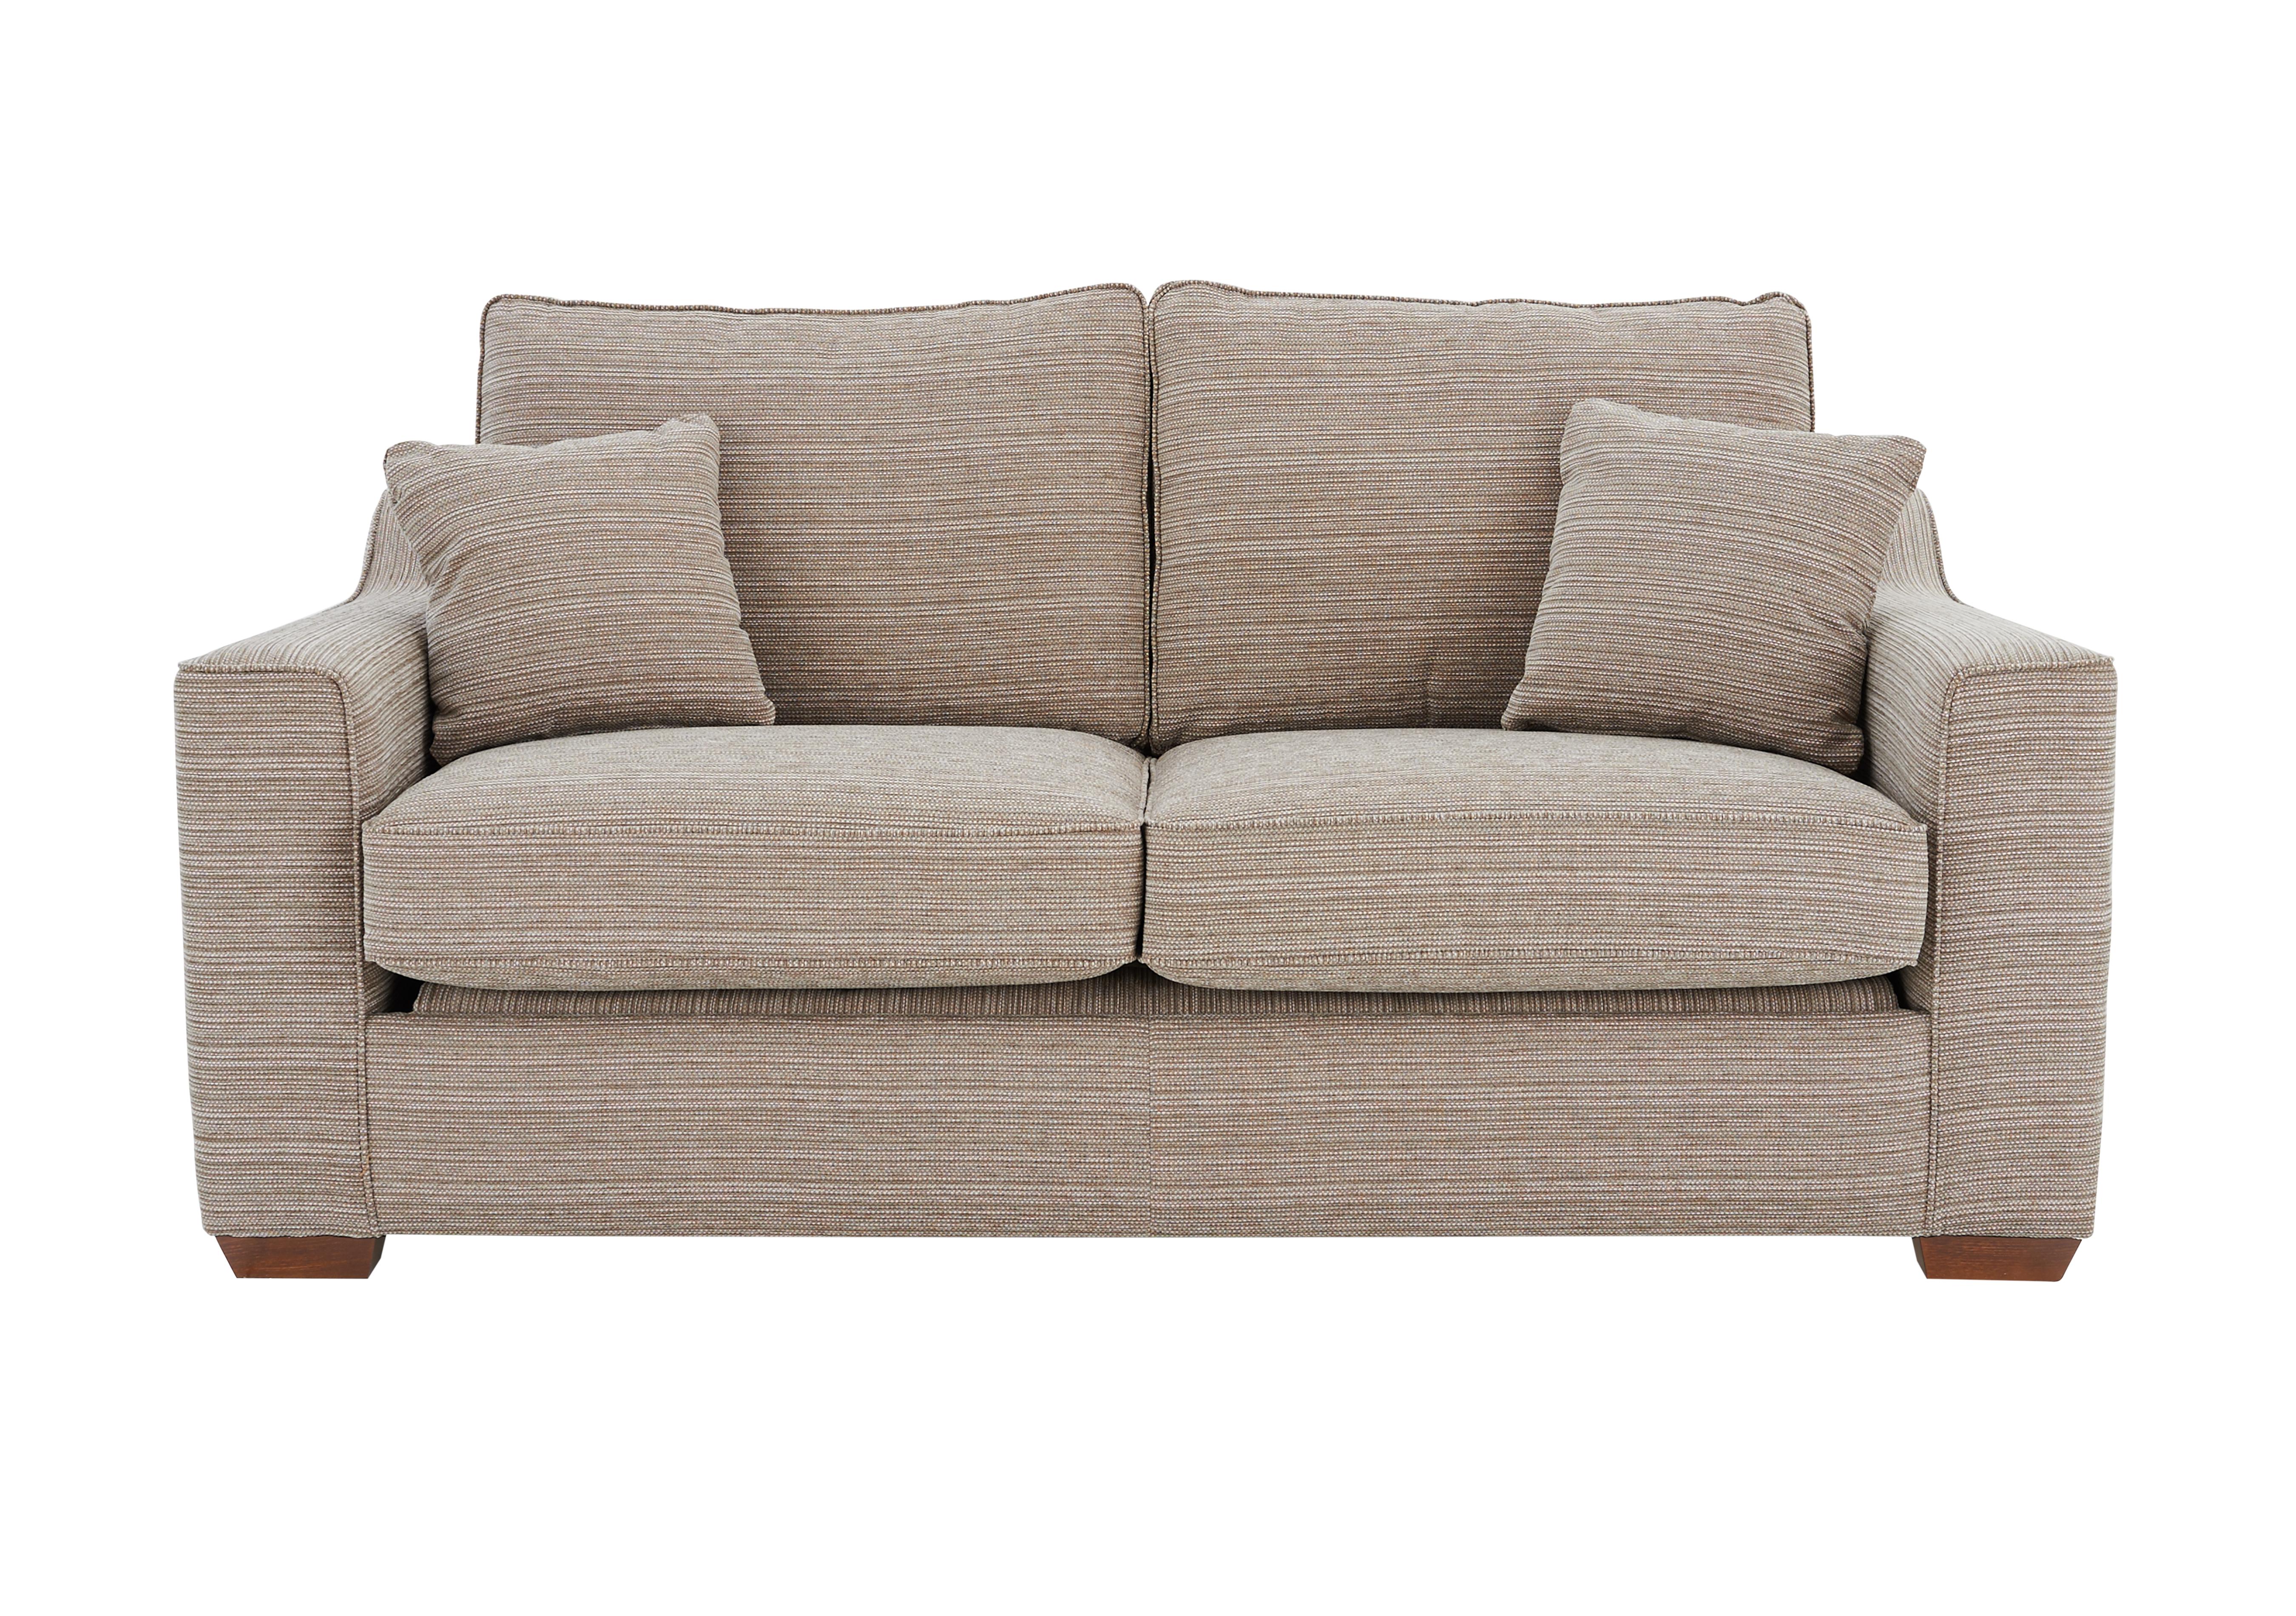 Furniture Village 21 Seater Sofas Top Sellers, 21 OFF ...